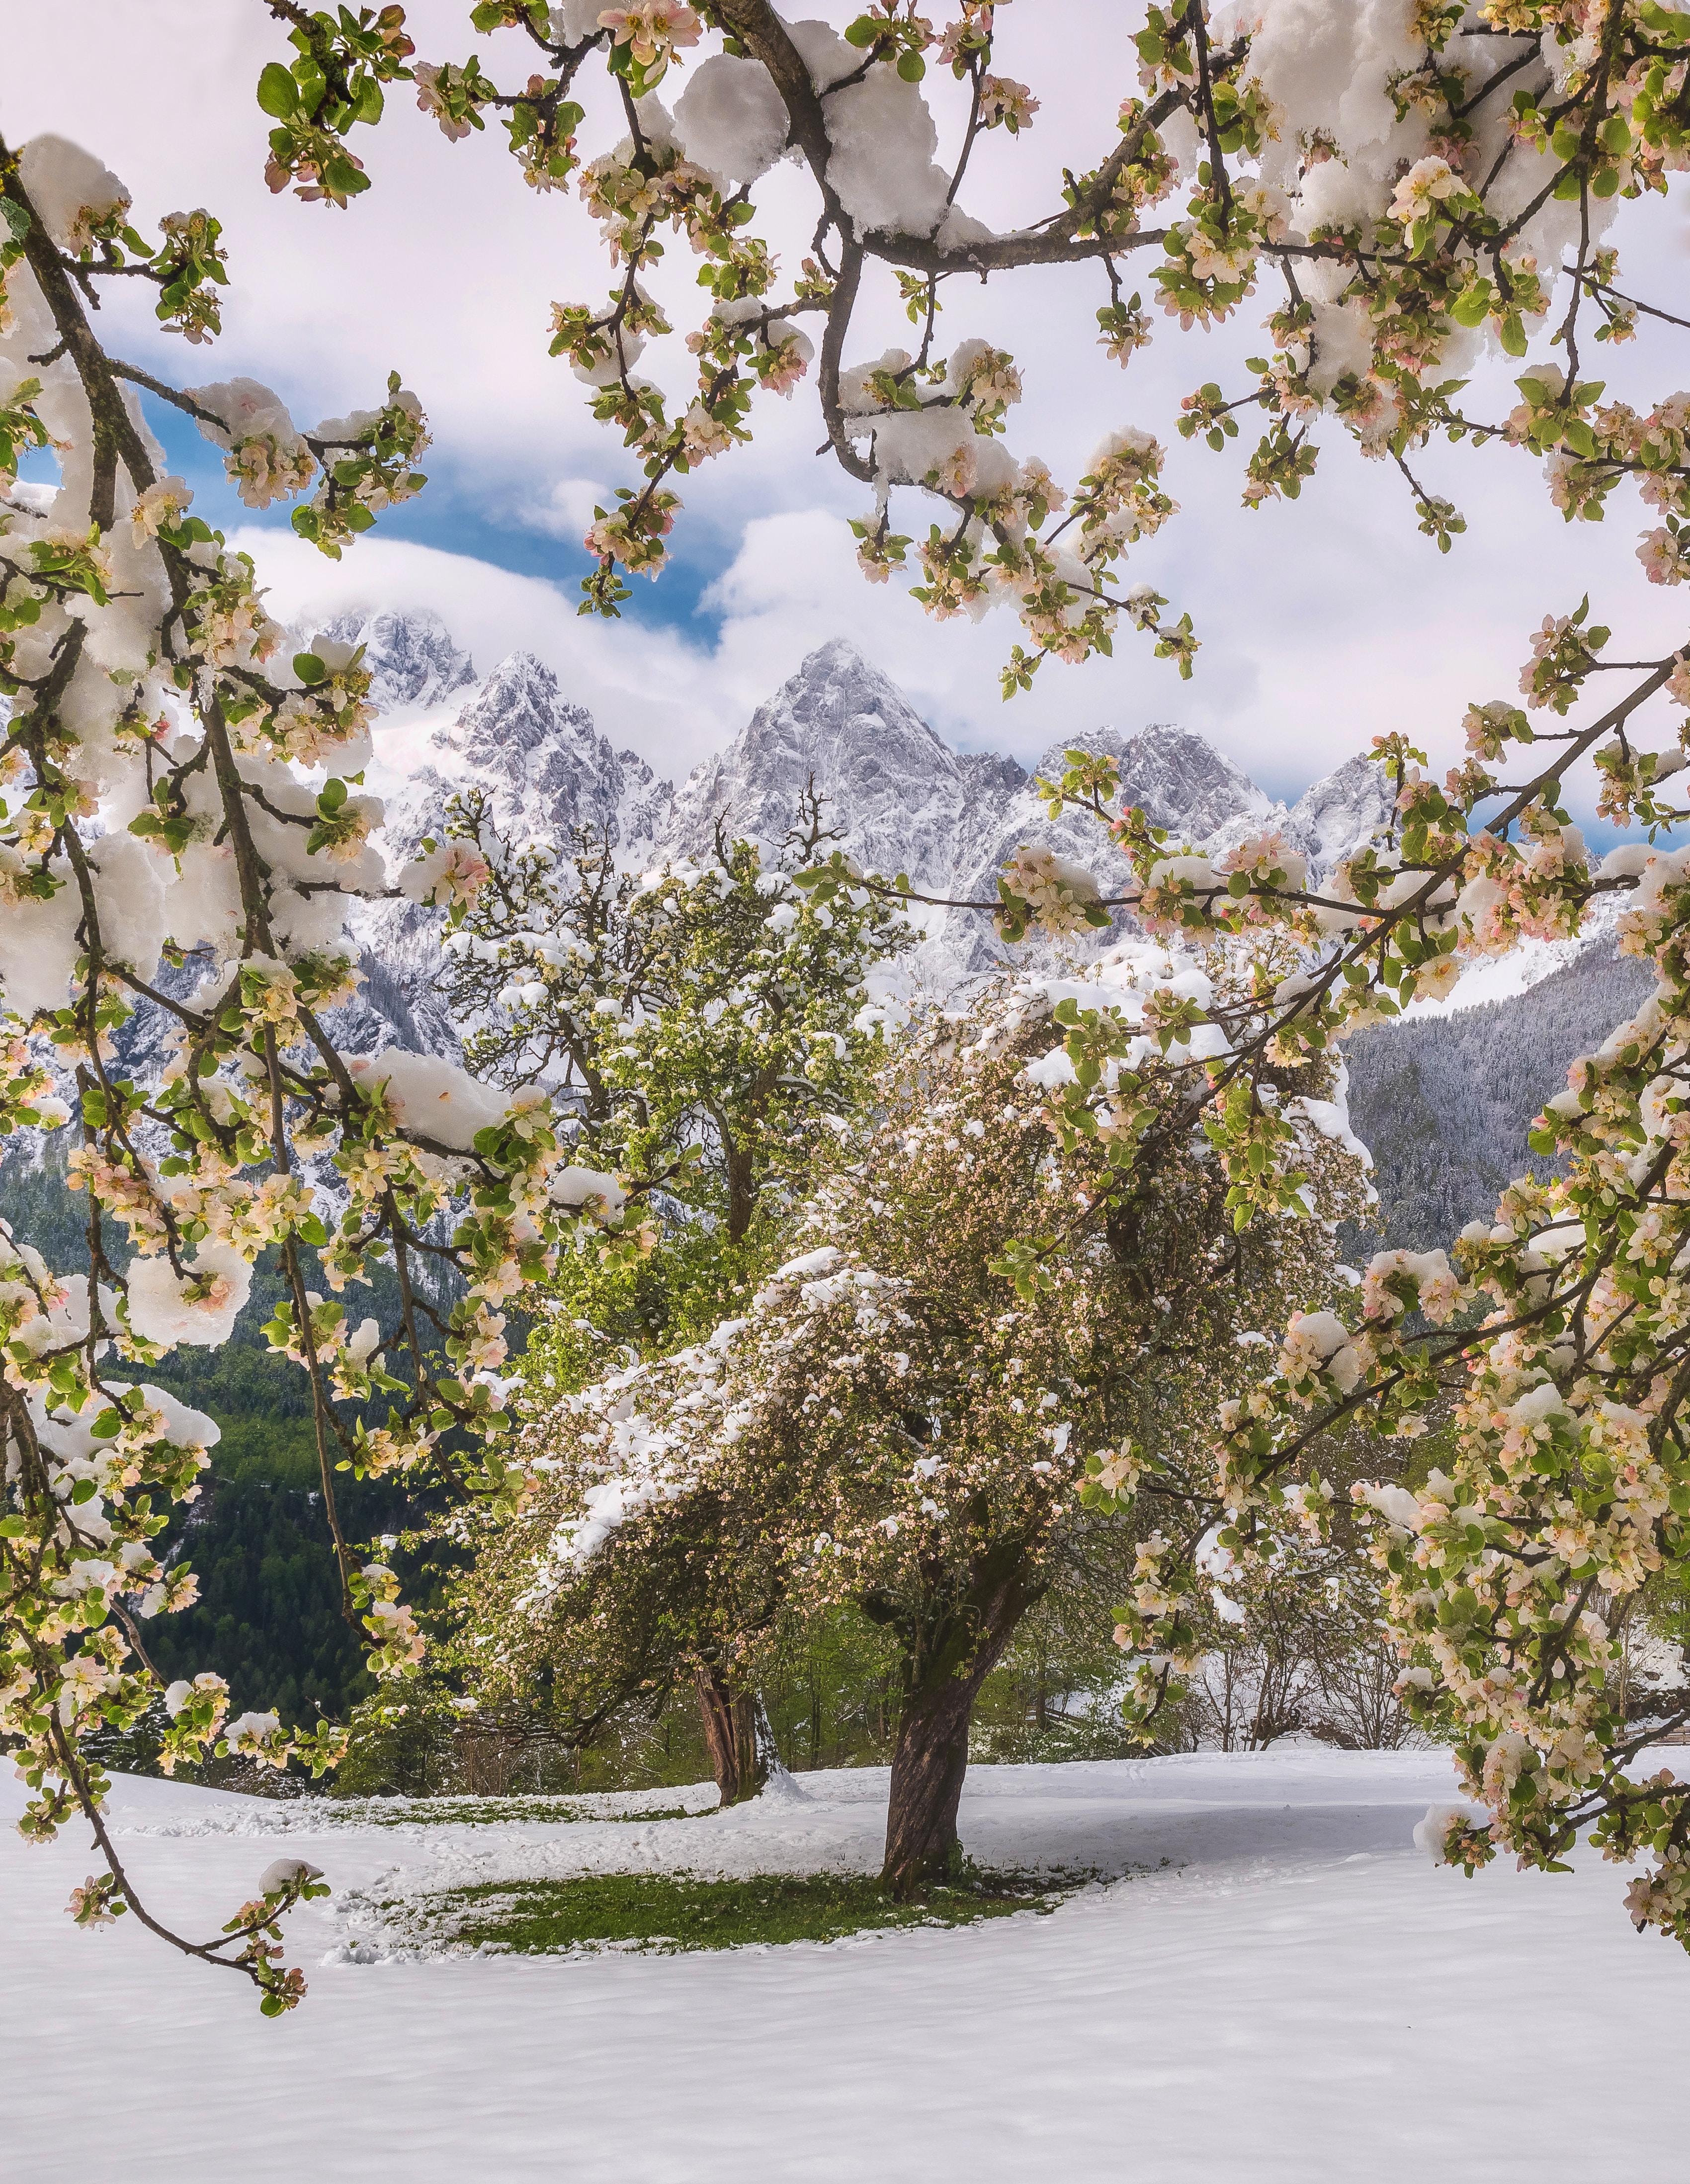 snow, snow covered, nature, flowers, trees, mountains, snowbound Full HD